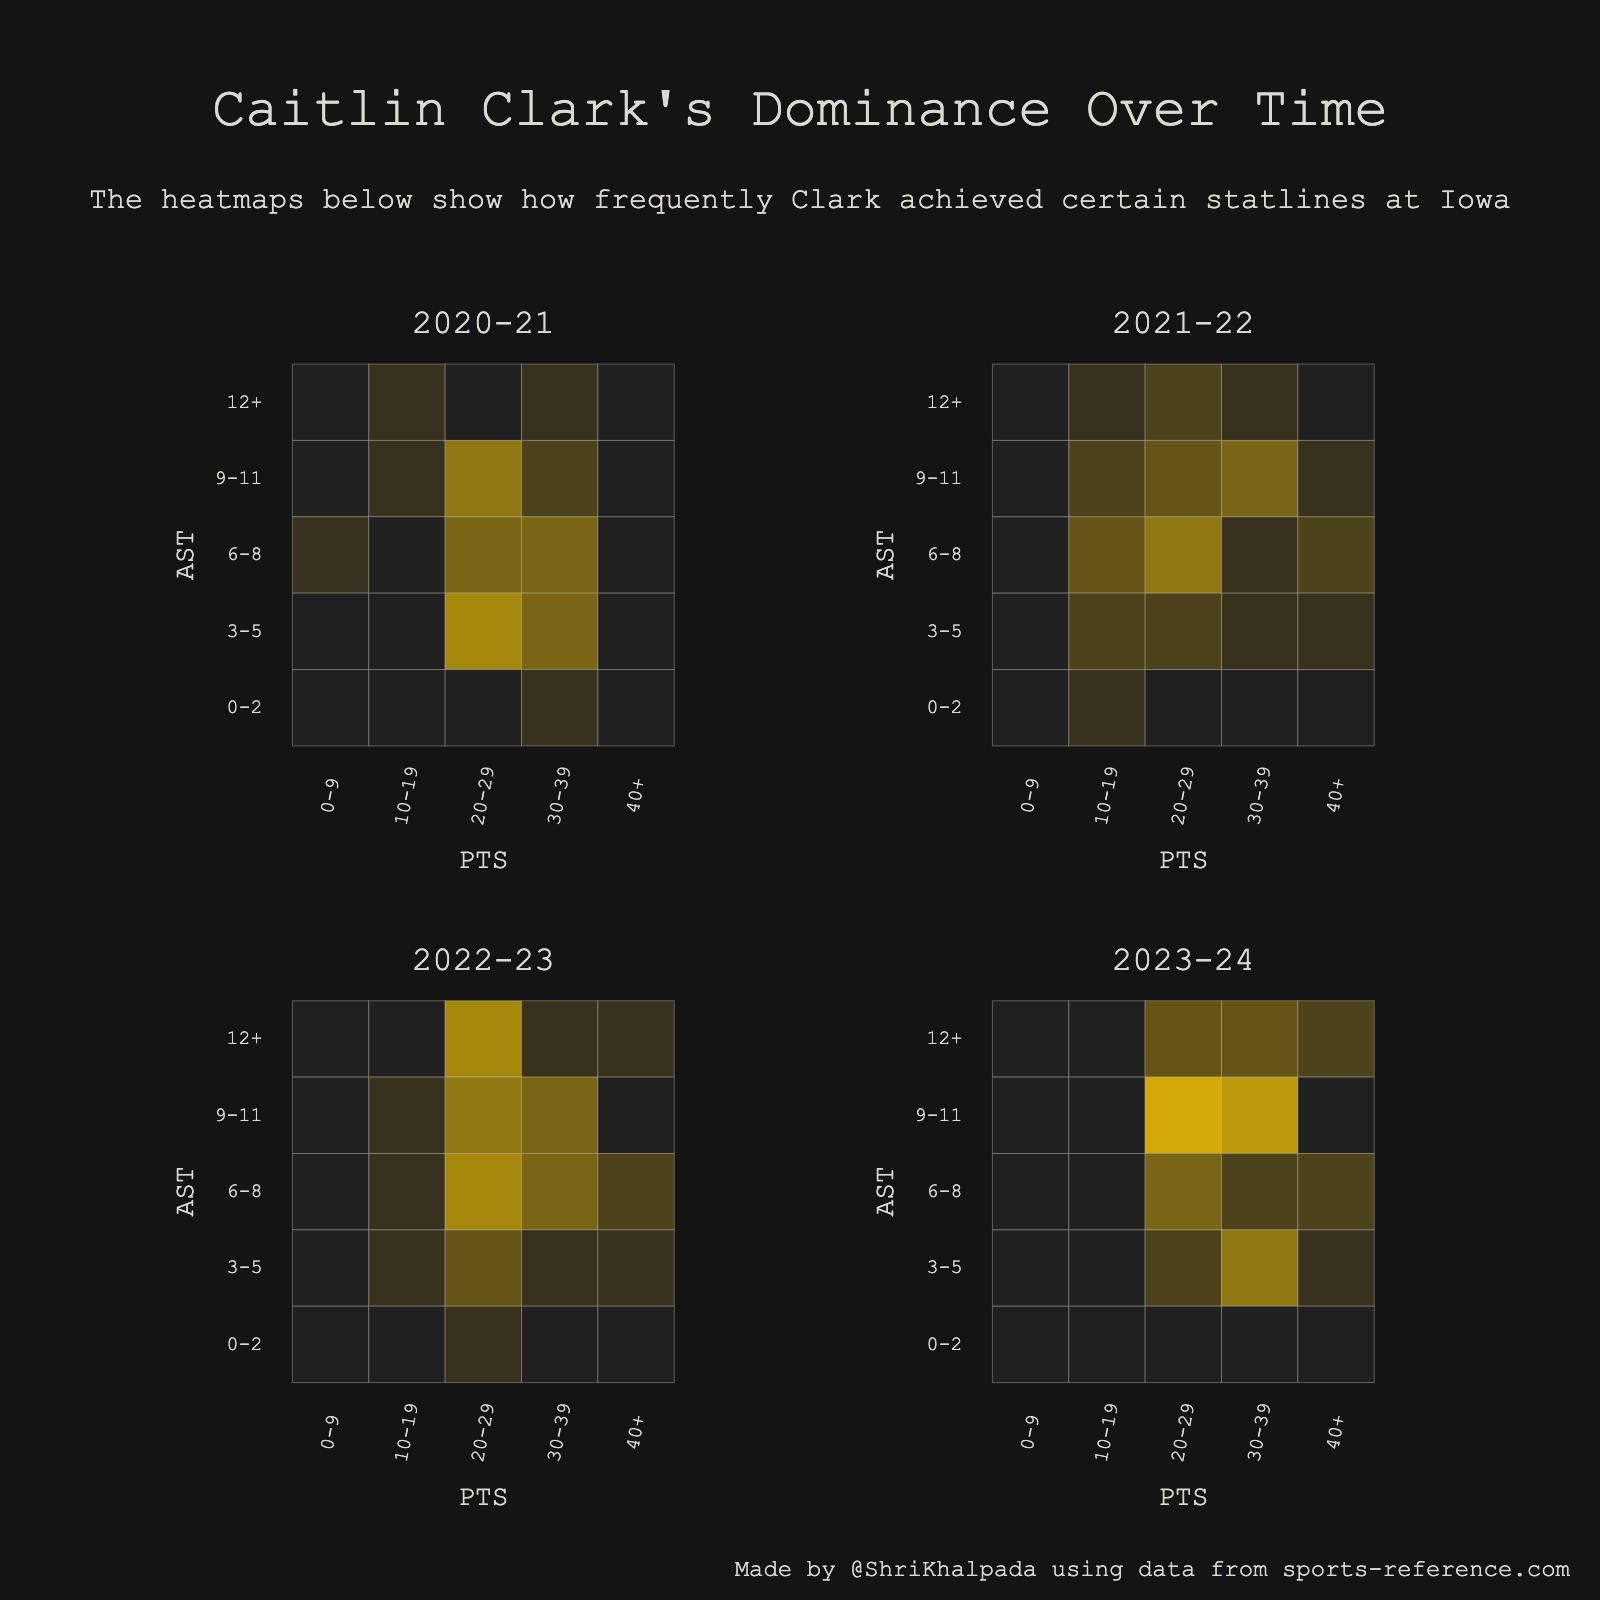 A set of heatmaps titled "Caitlin Clark's Dominance Over Time" showing the frequency of certain statlines for basketball player Caitlin Clark over multiple seasons.